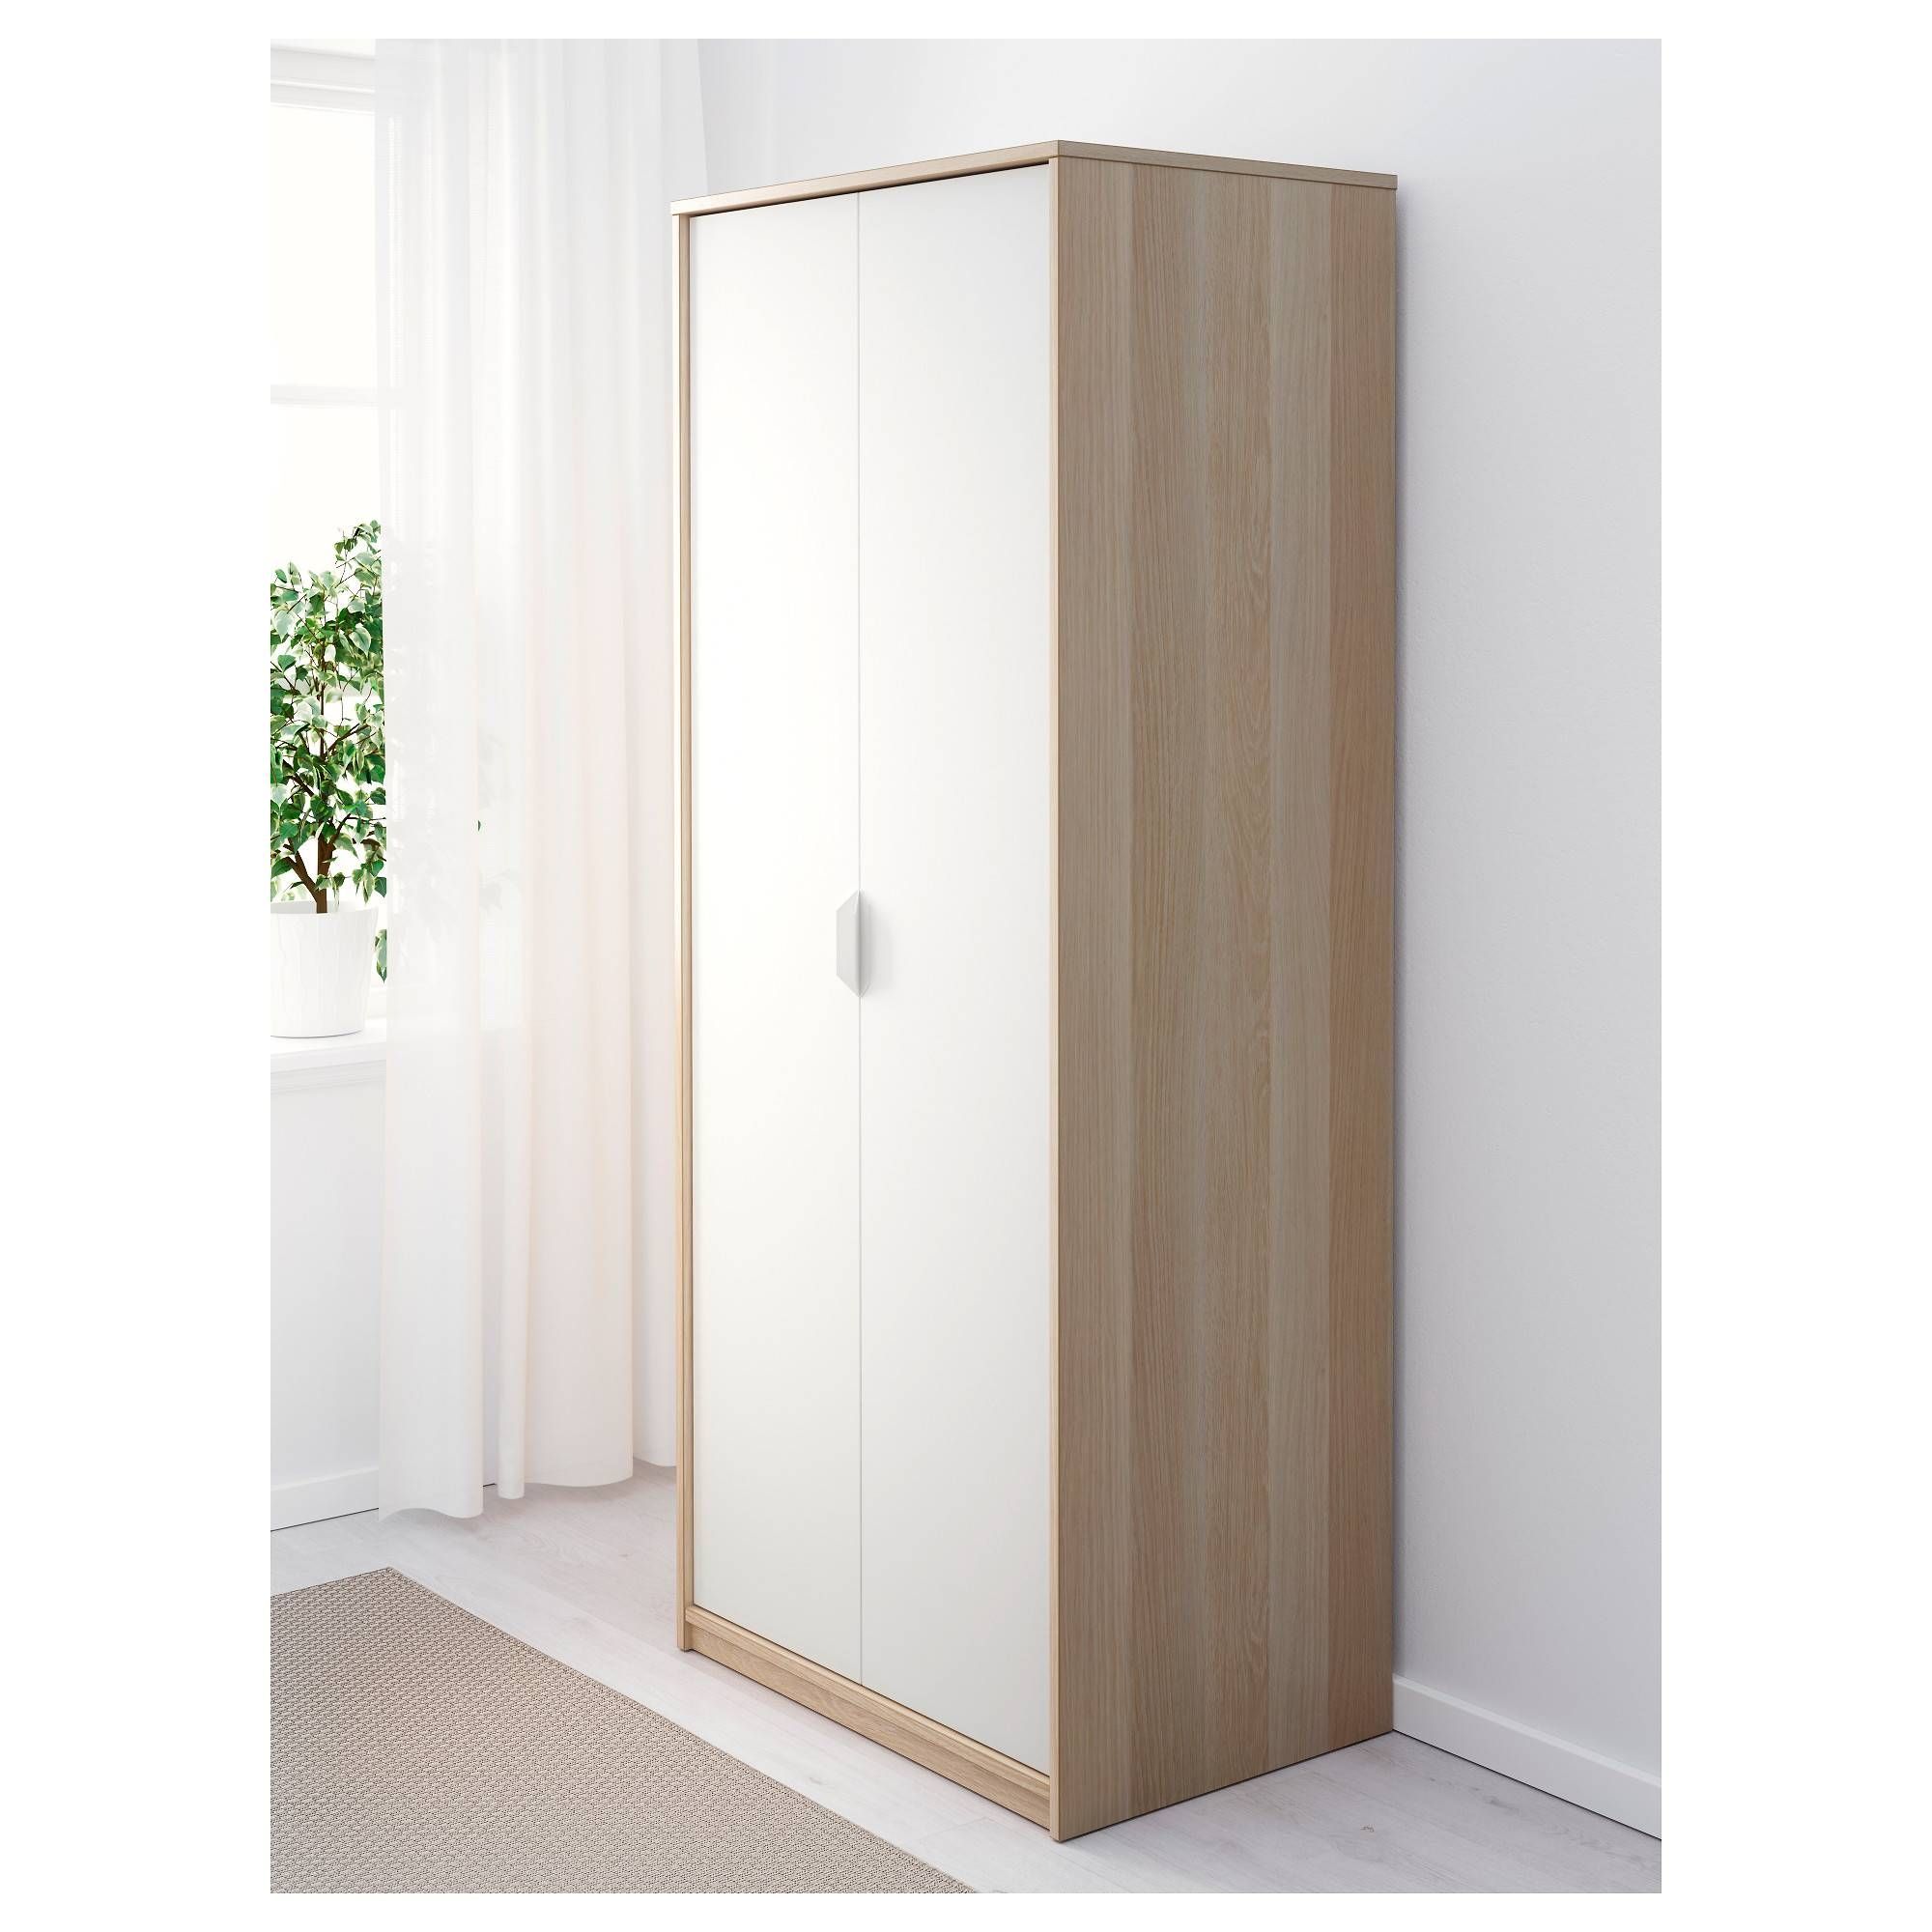 Askvoll Wardrobe White Stained Oak Effect/white 80x52x189 Cm – Ikea Throughout Oak And White Wardrobes (View 5 of 15)